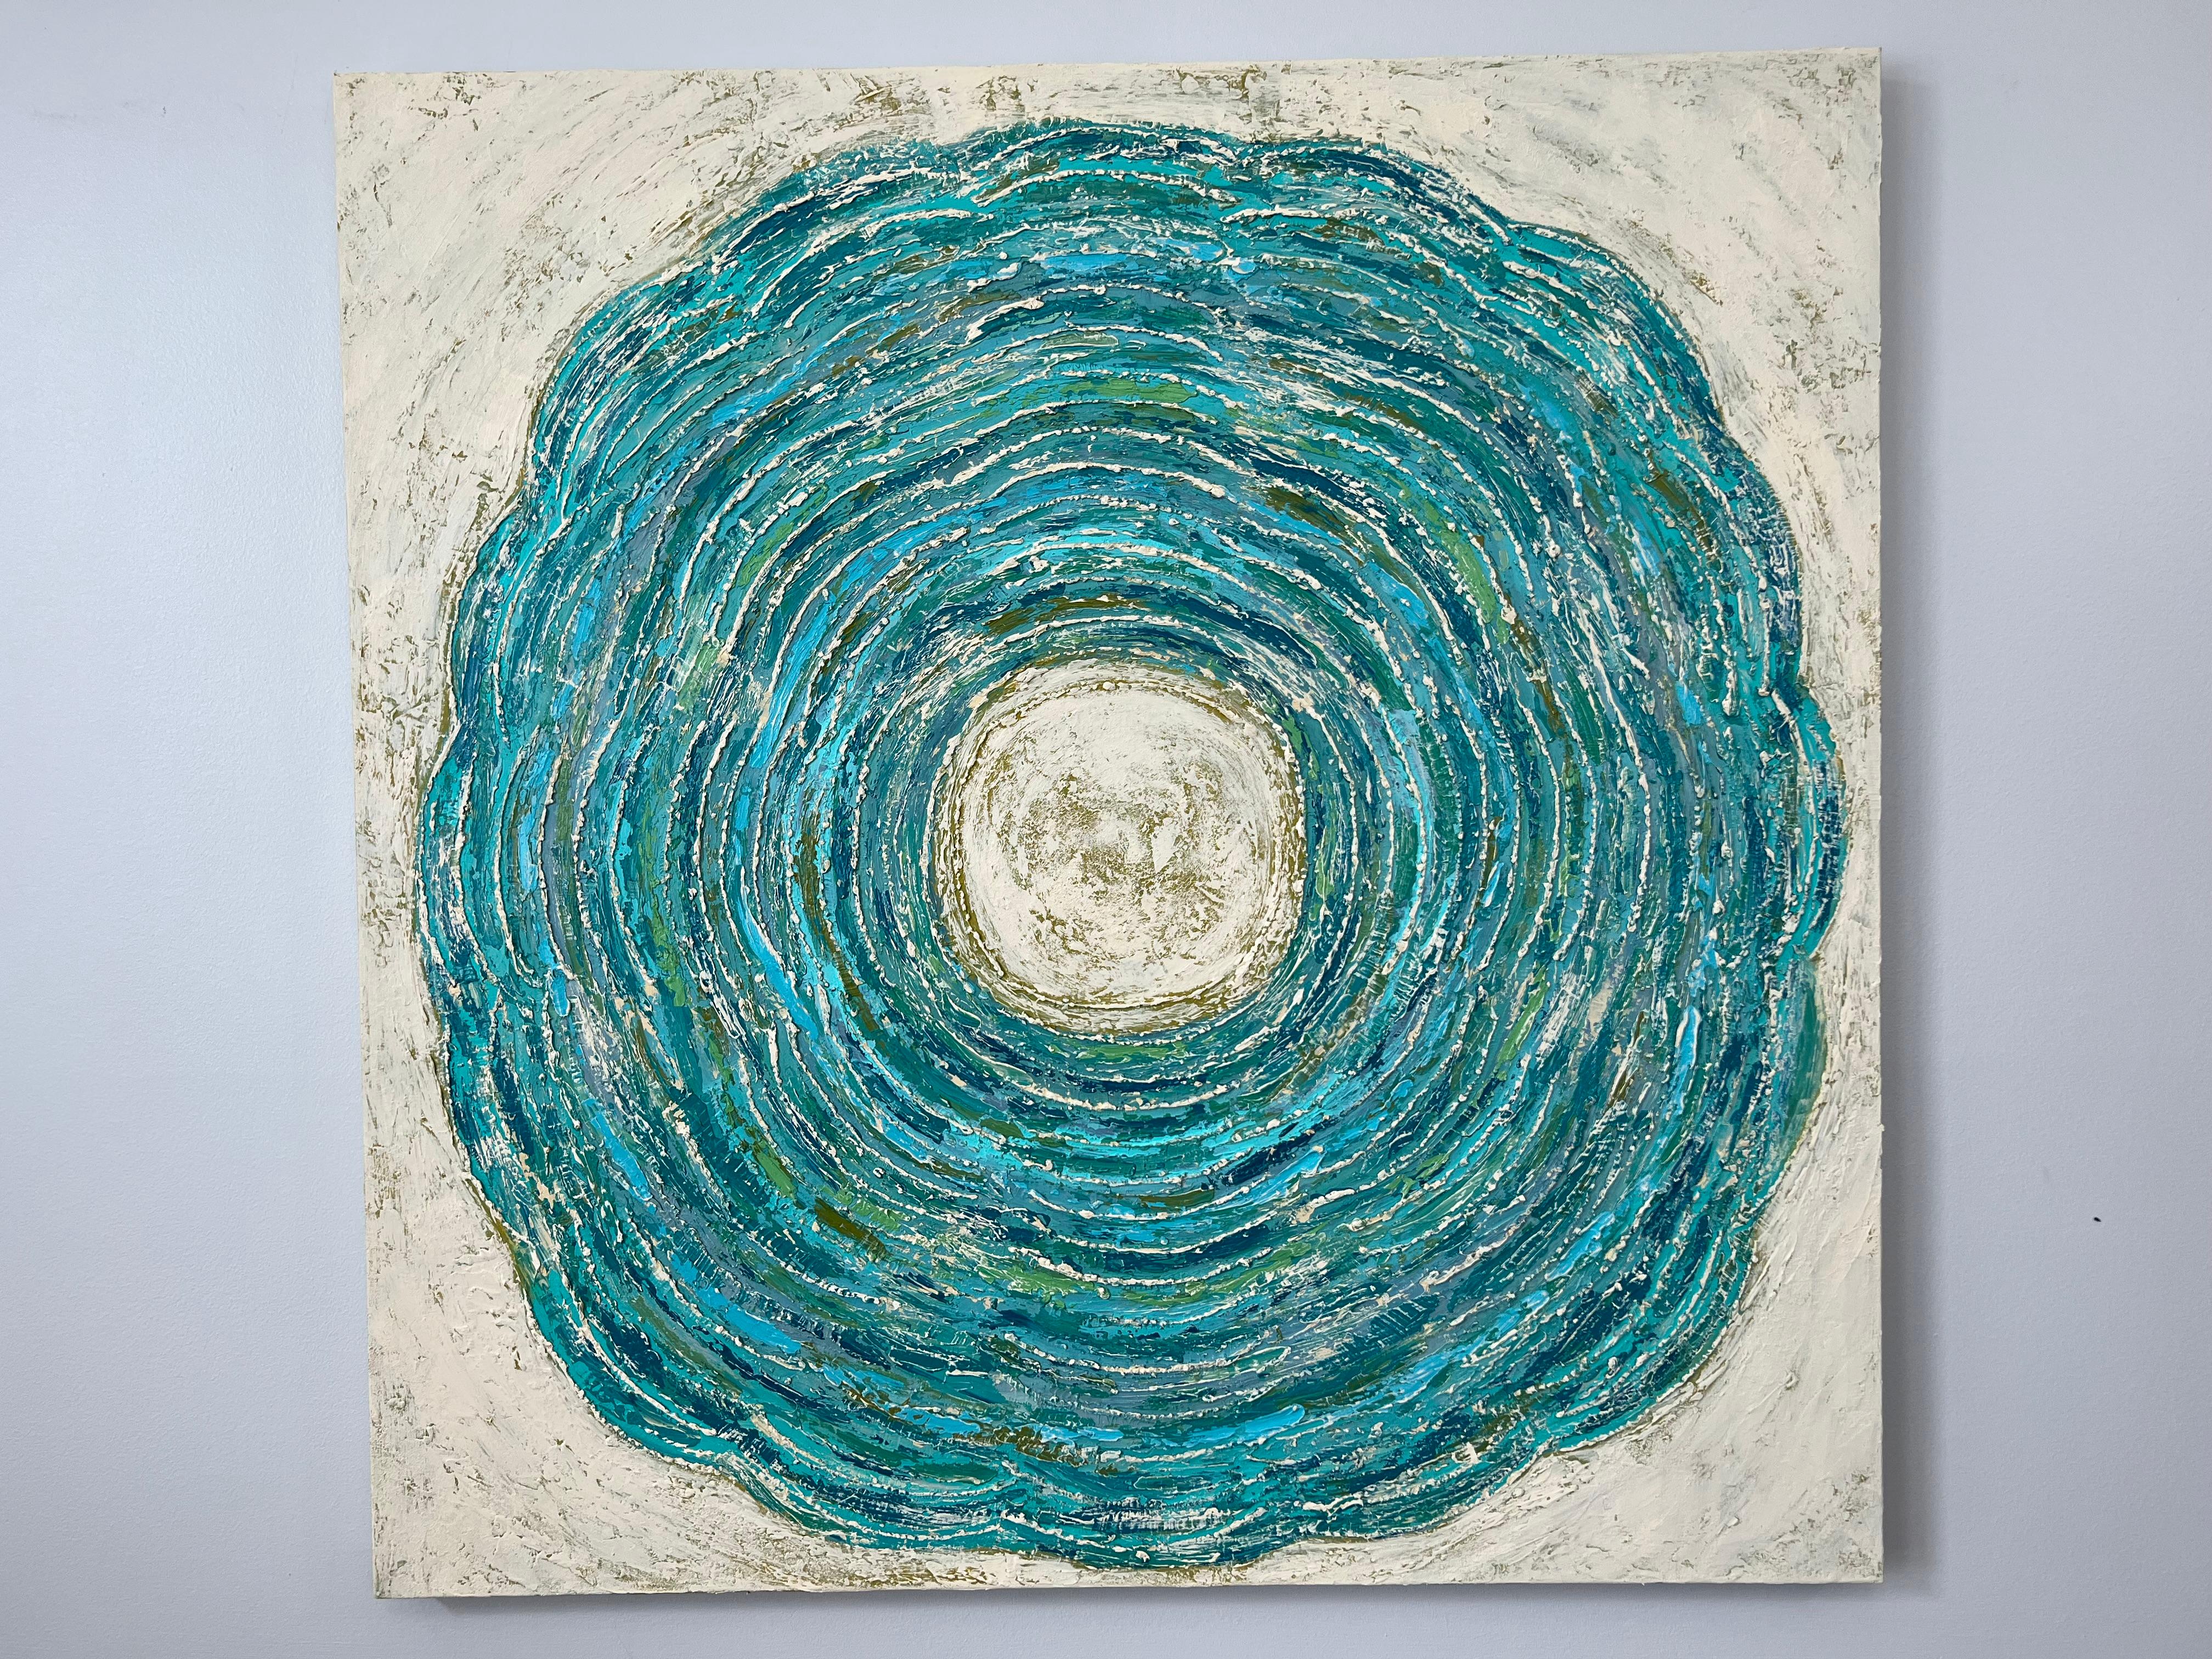 <p>Artist Comments<br>Artist Janet Hamilton creates a contemporary abstract painting using drywall knives. The mesmerizing repetitive circular motion forms an organic shape. Shades of blue, green, and cream highlight the intricate details of this